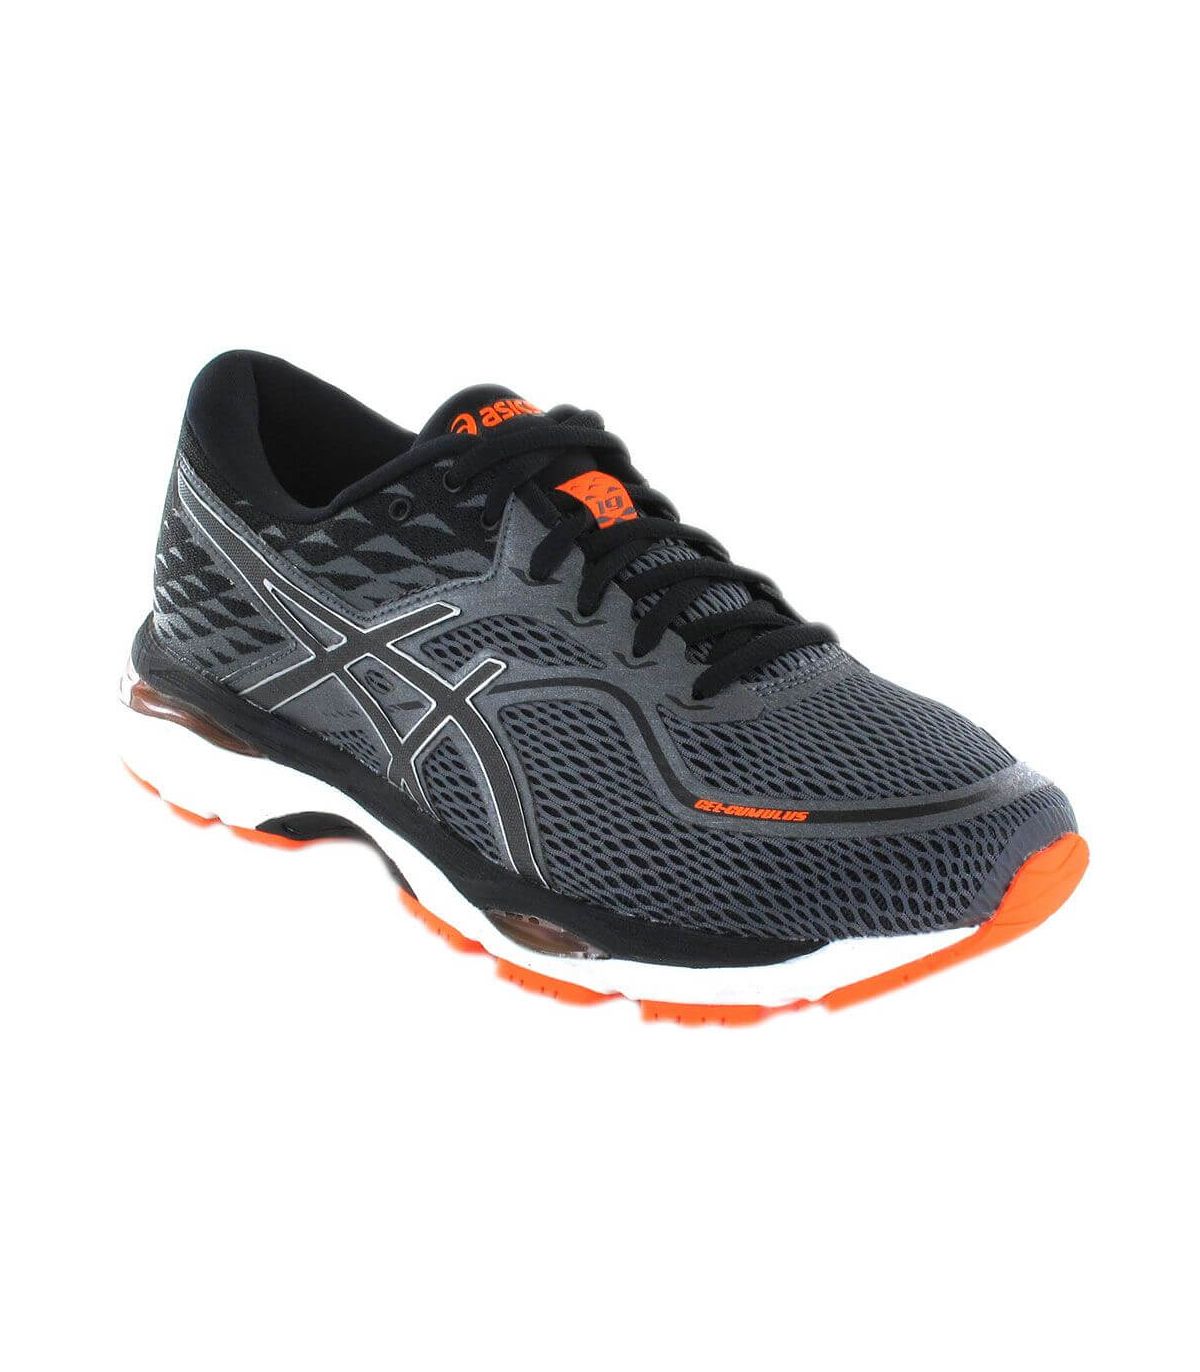 necessity Diligence Meaningless ➤Asics Gel Cumulus 19 Gris - ➤ Running Man Shoes